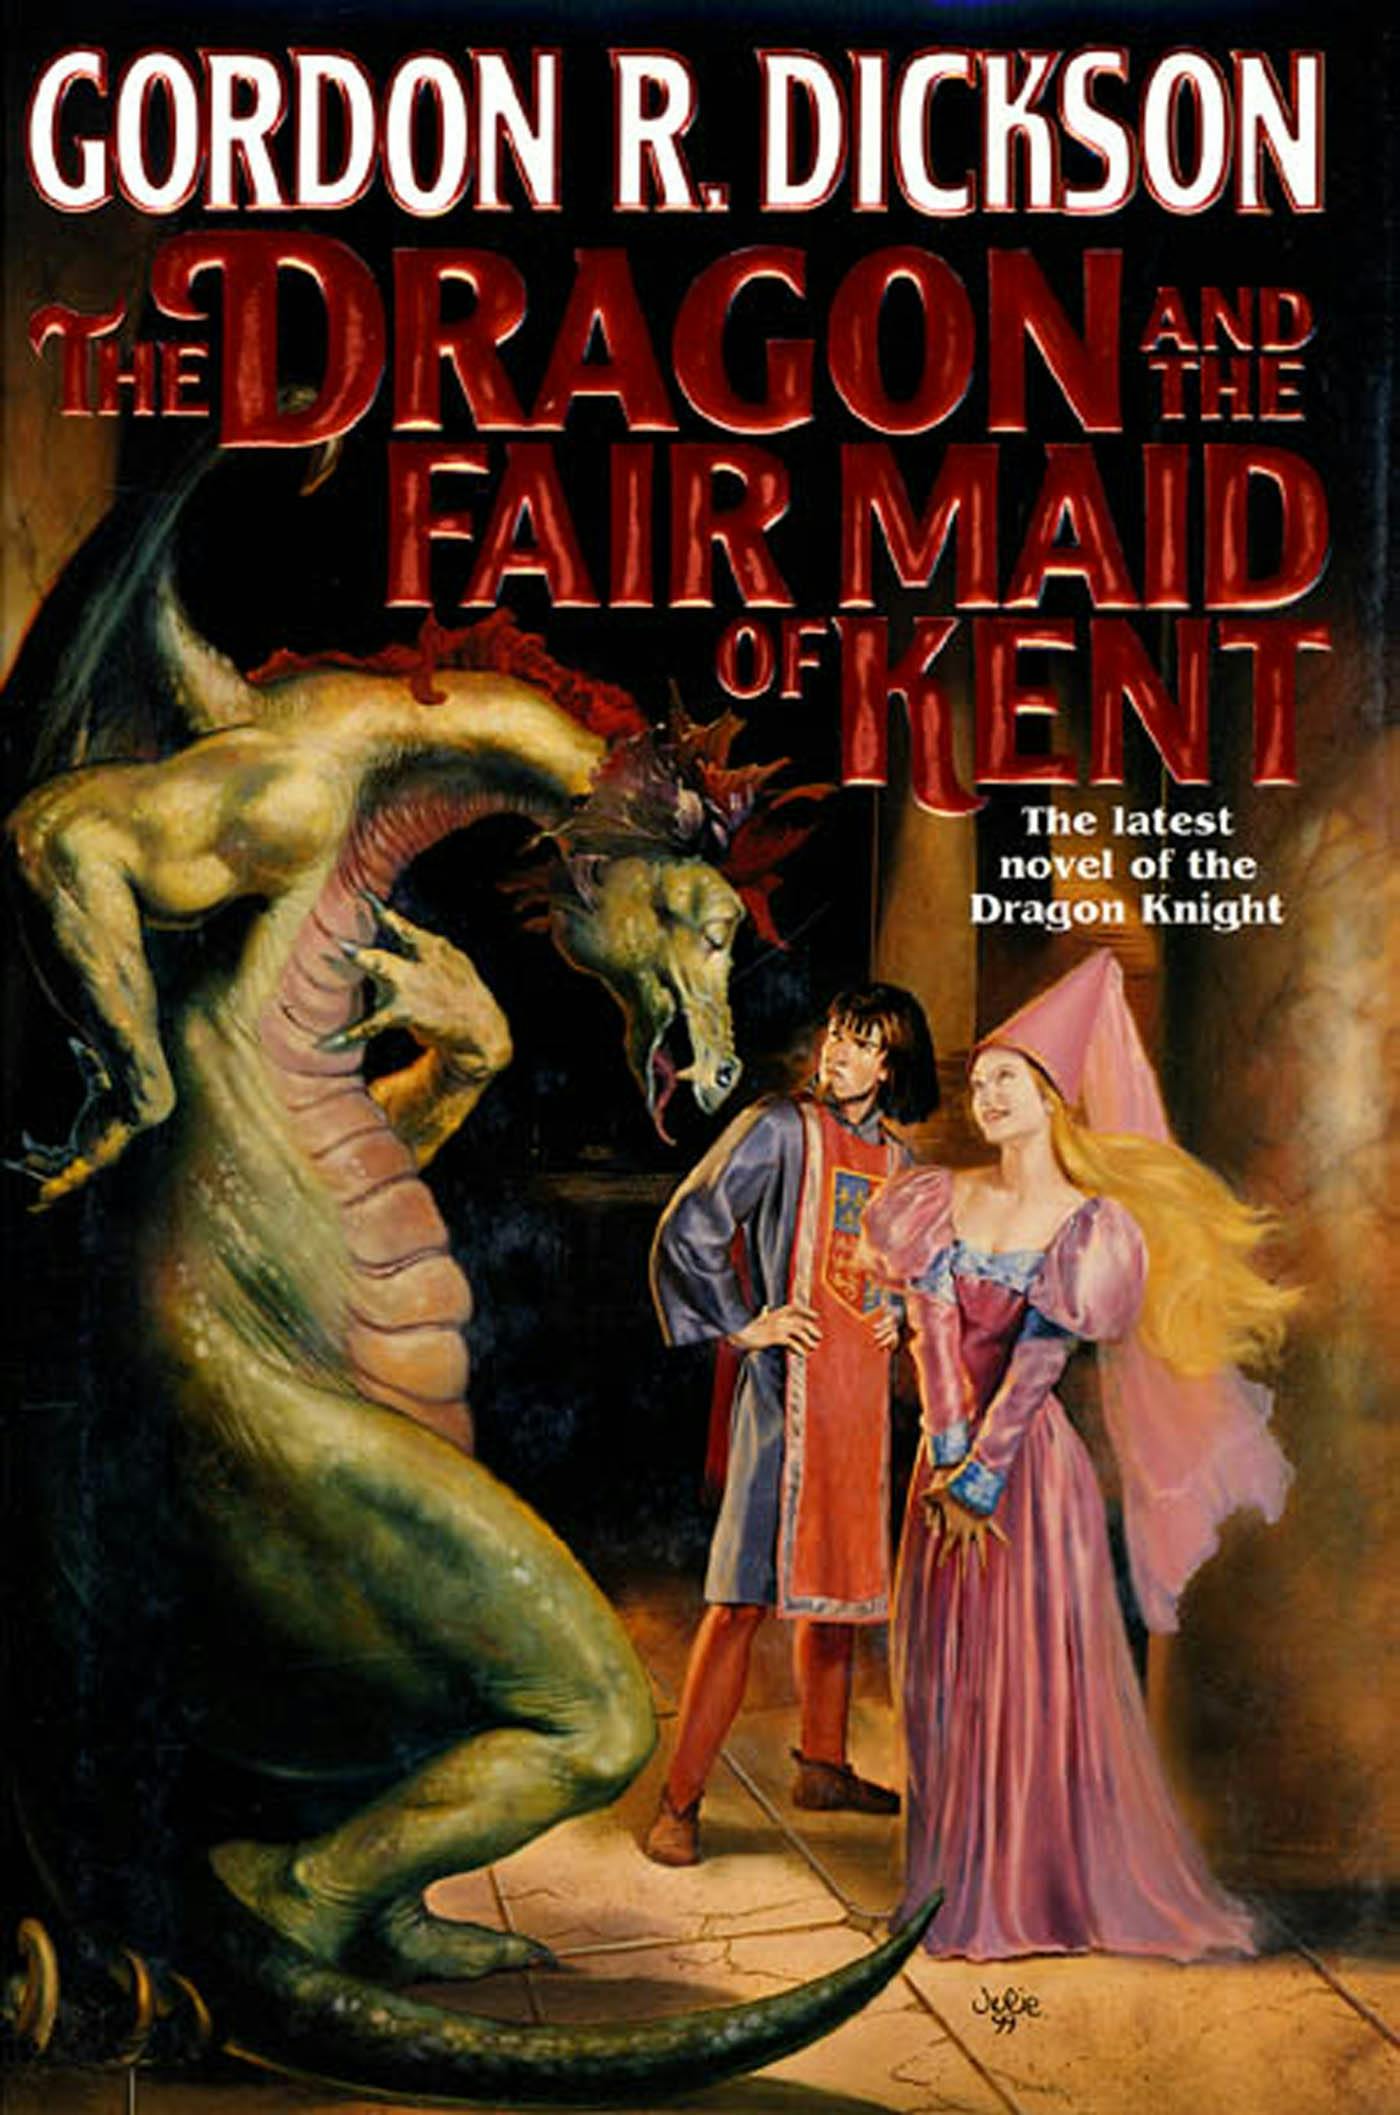 Cover for the book titled as: The Dragon and the Fair Maid of Kent